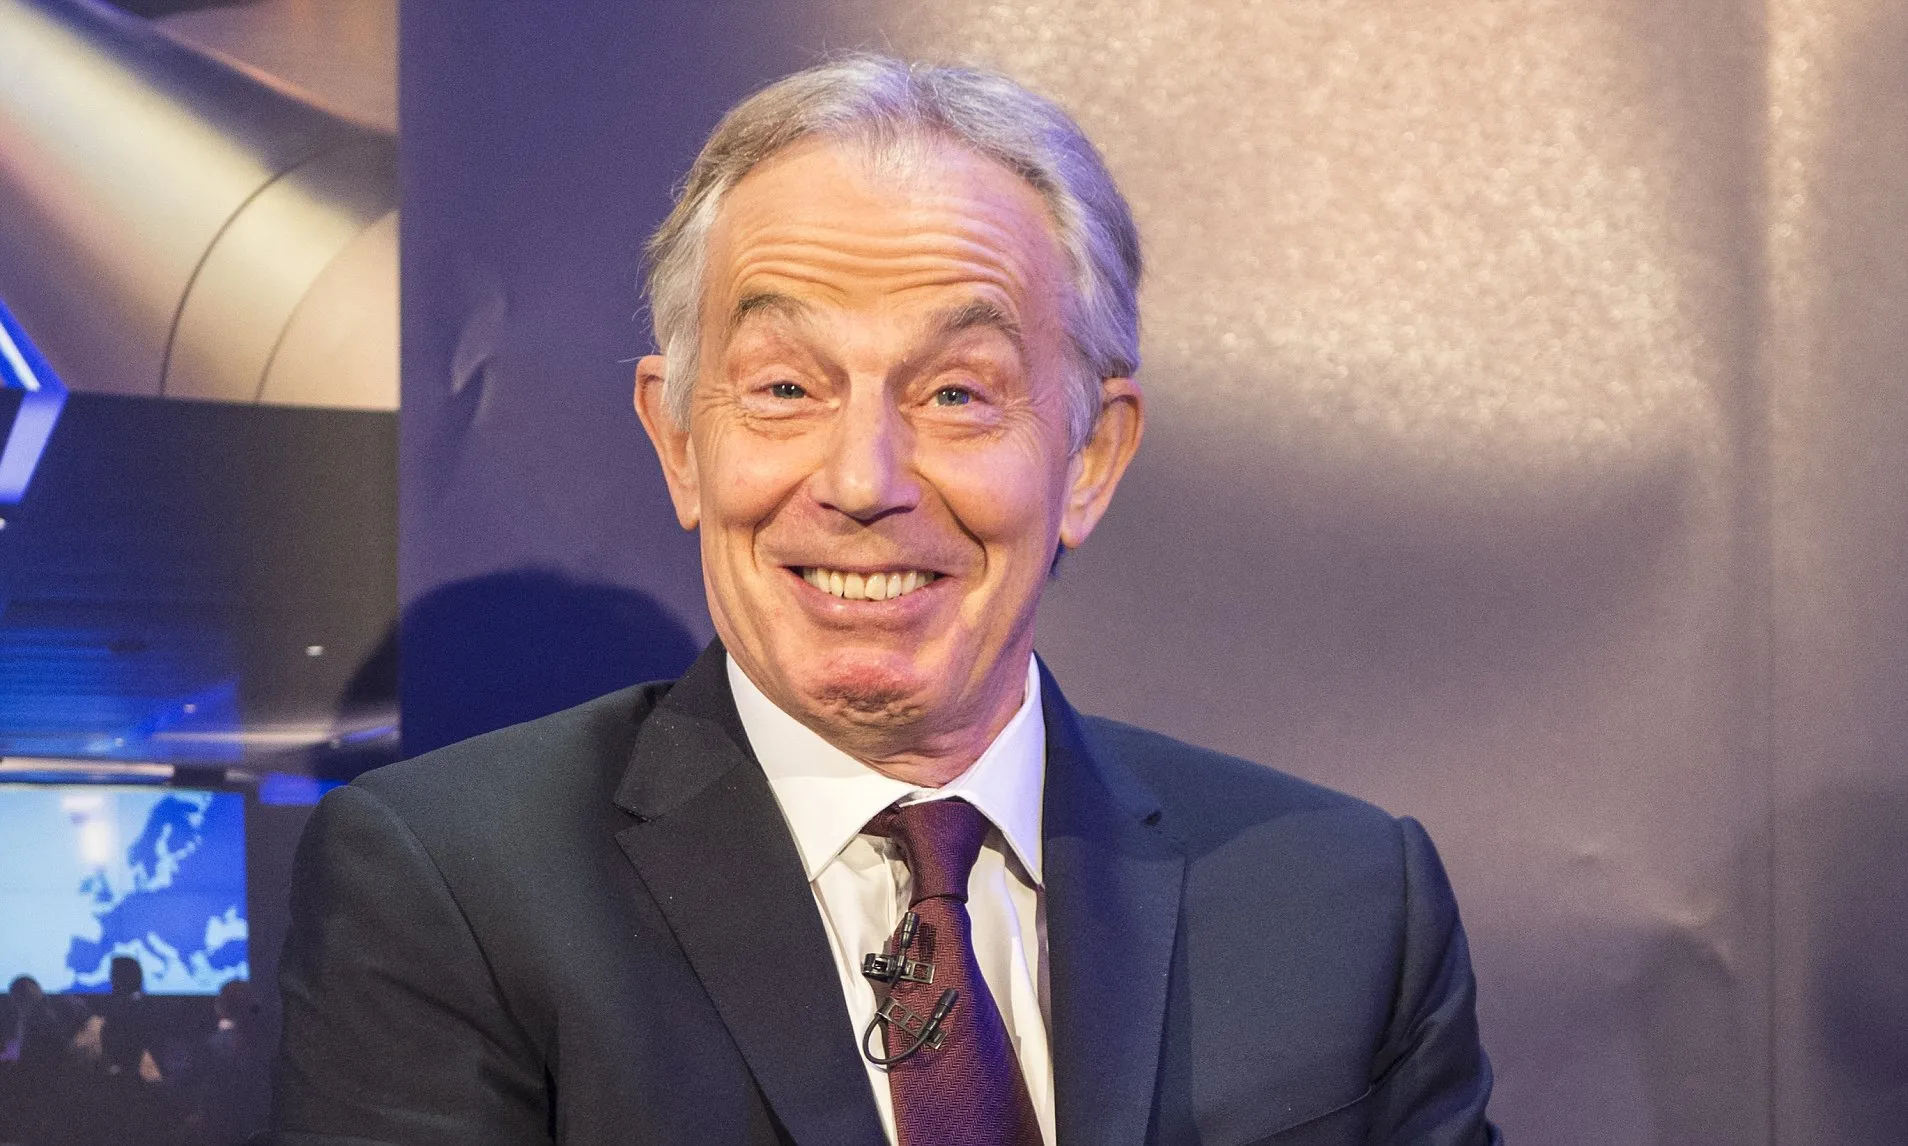 <div>Calling For A Reset With Europe Blair Warns Politics Risks Becoming Populated By The ‘Weird & Wealthy’</div>